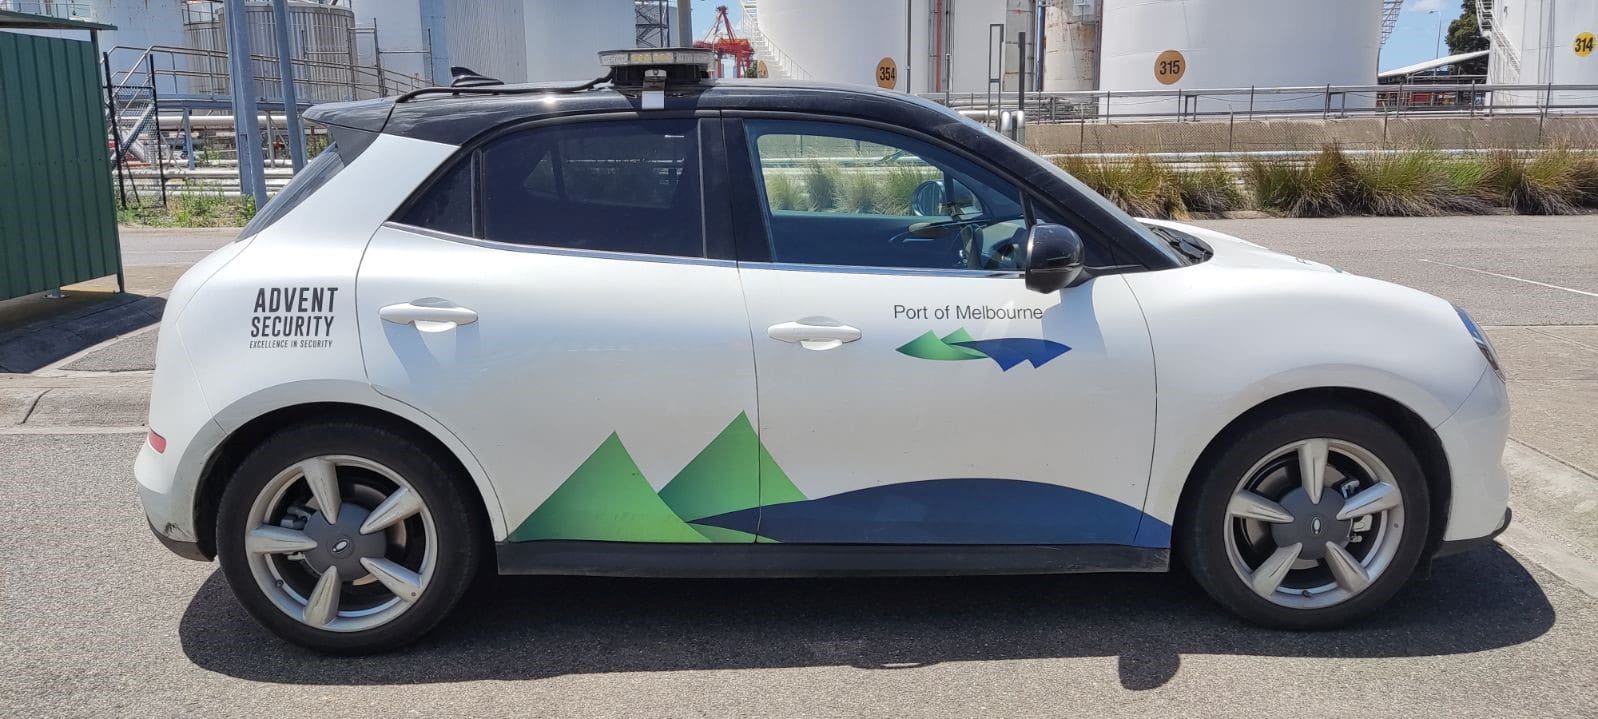 Advent Security's electric car used to secure the Port of Melbourne